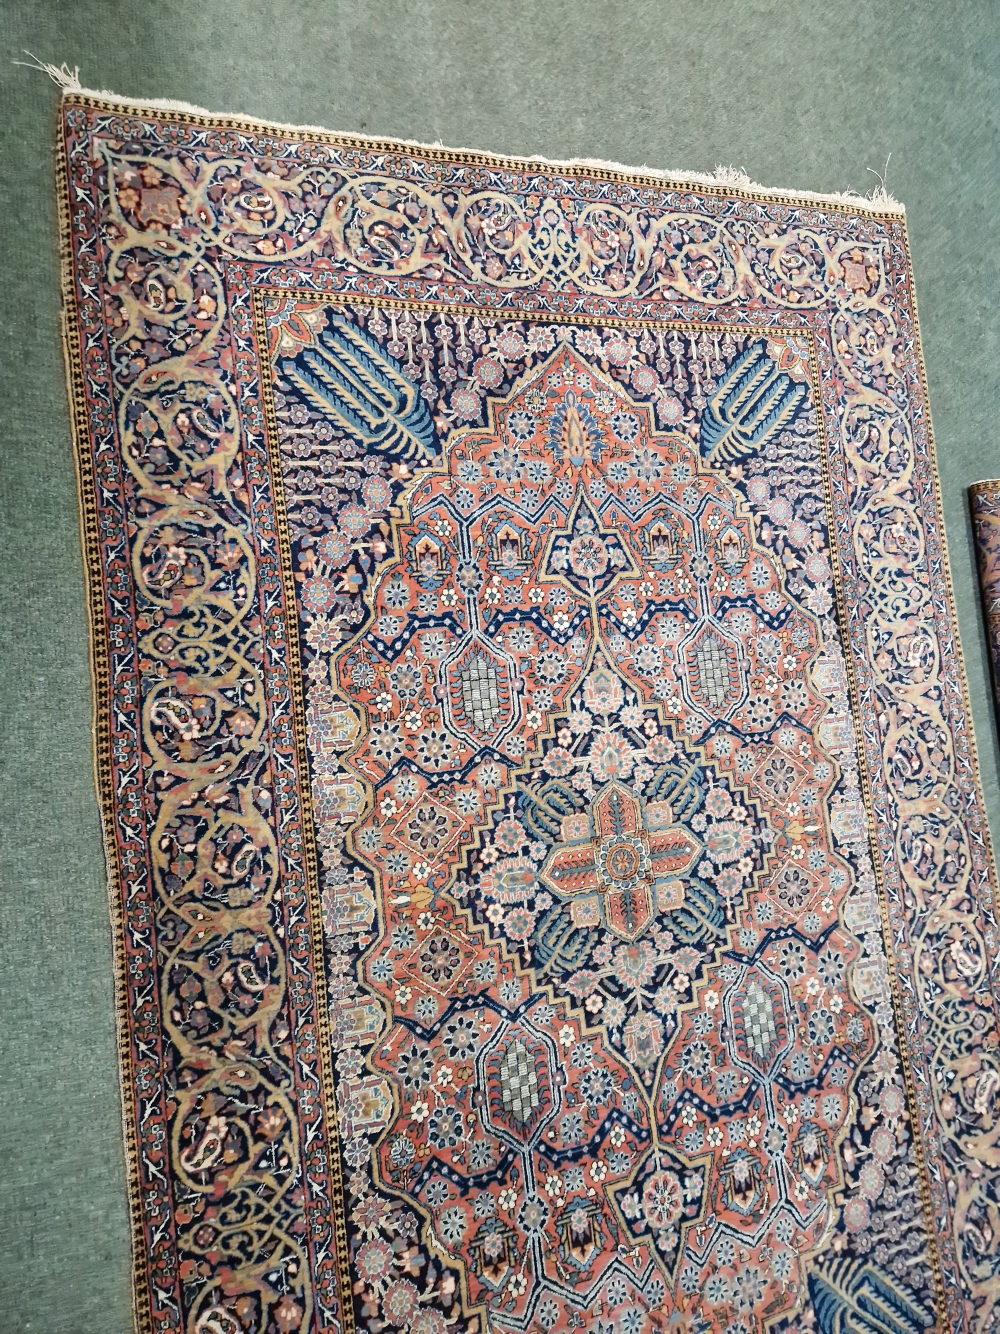 A PAIR OF ANTIQUE PERSIAN KASHAN RUGS. 298 x 132cms - Image 10 of 12